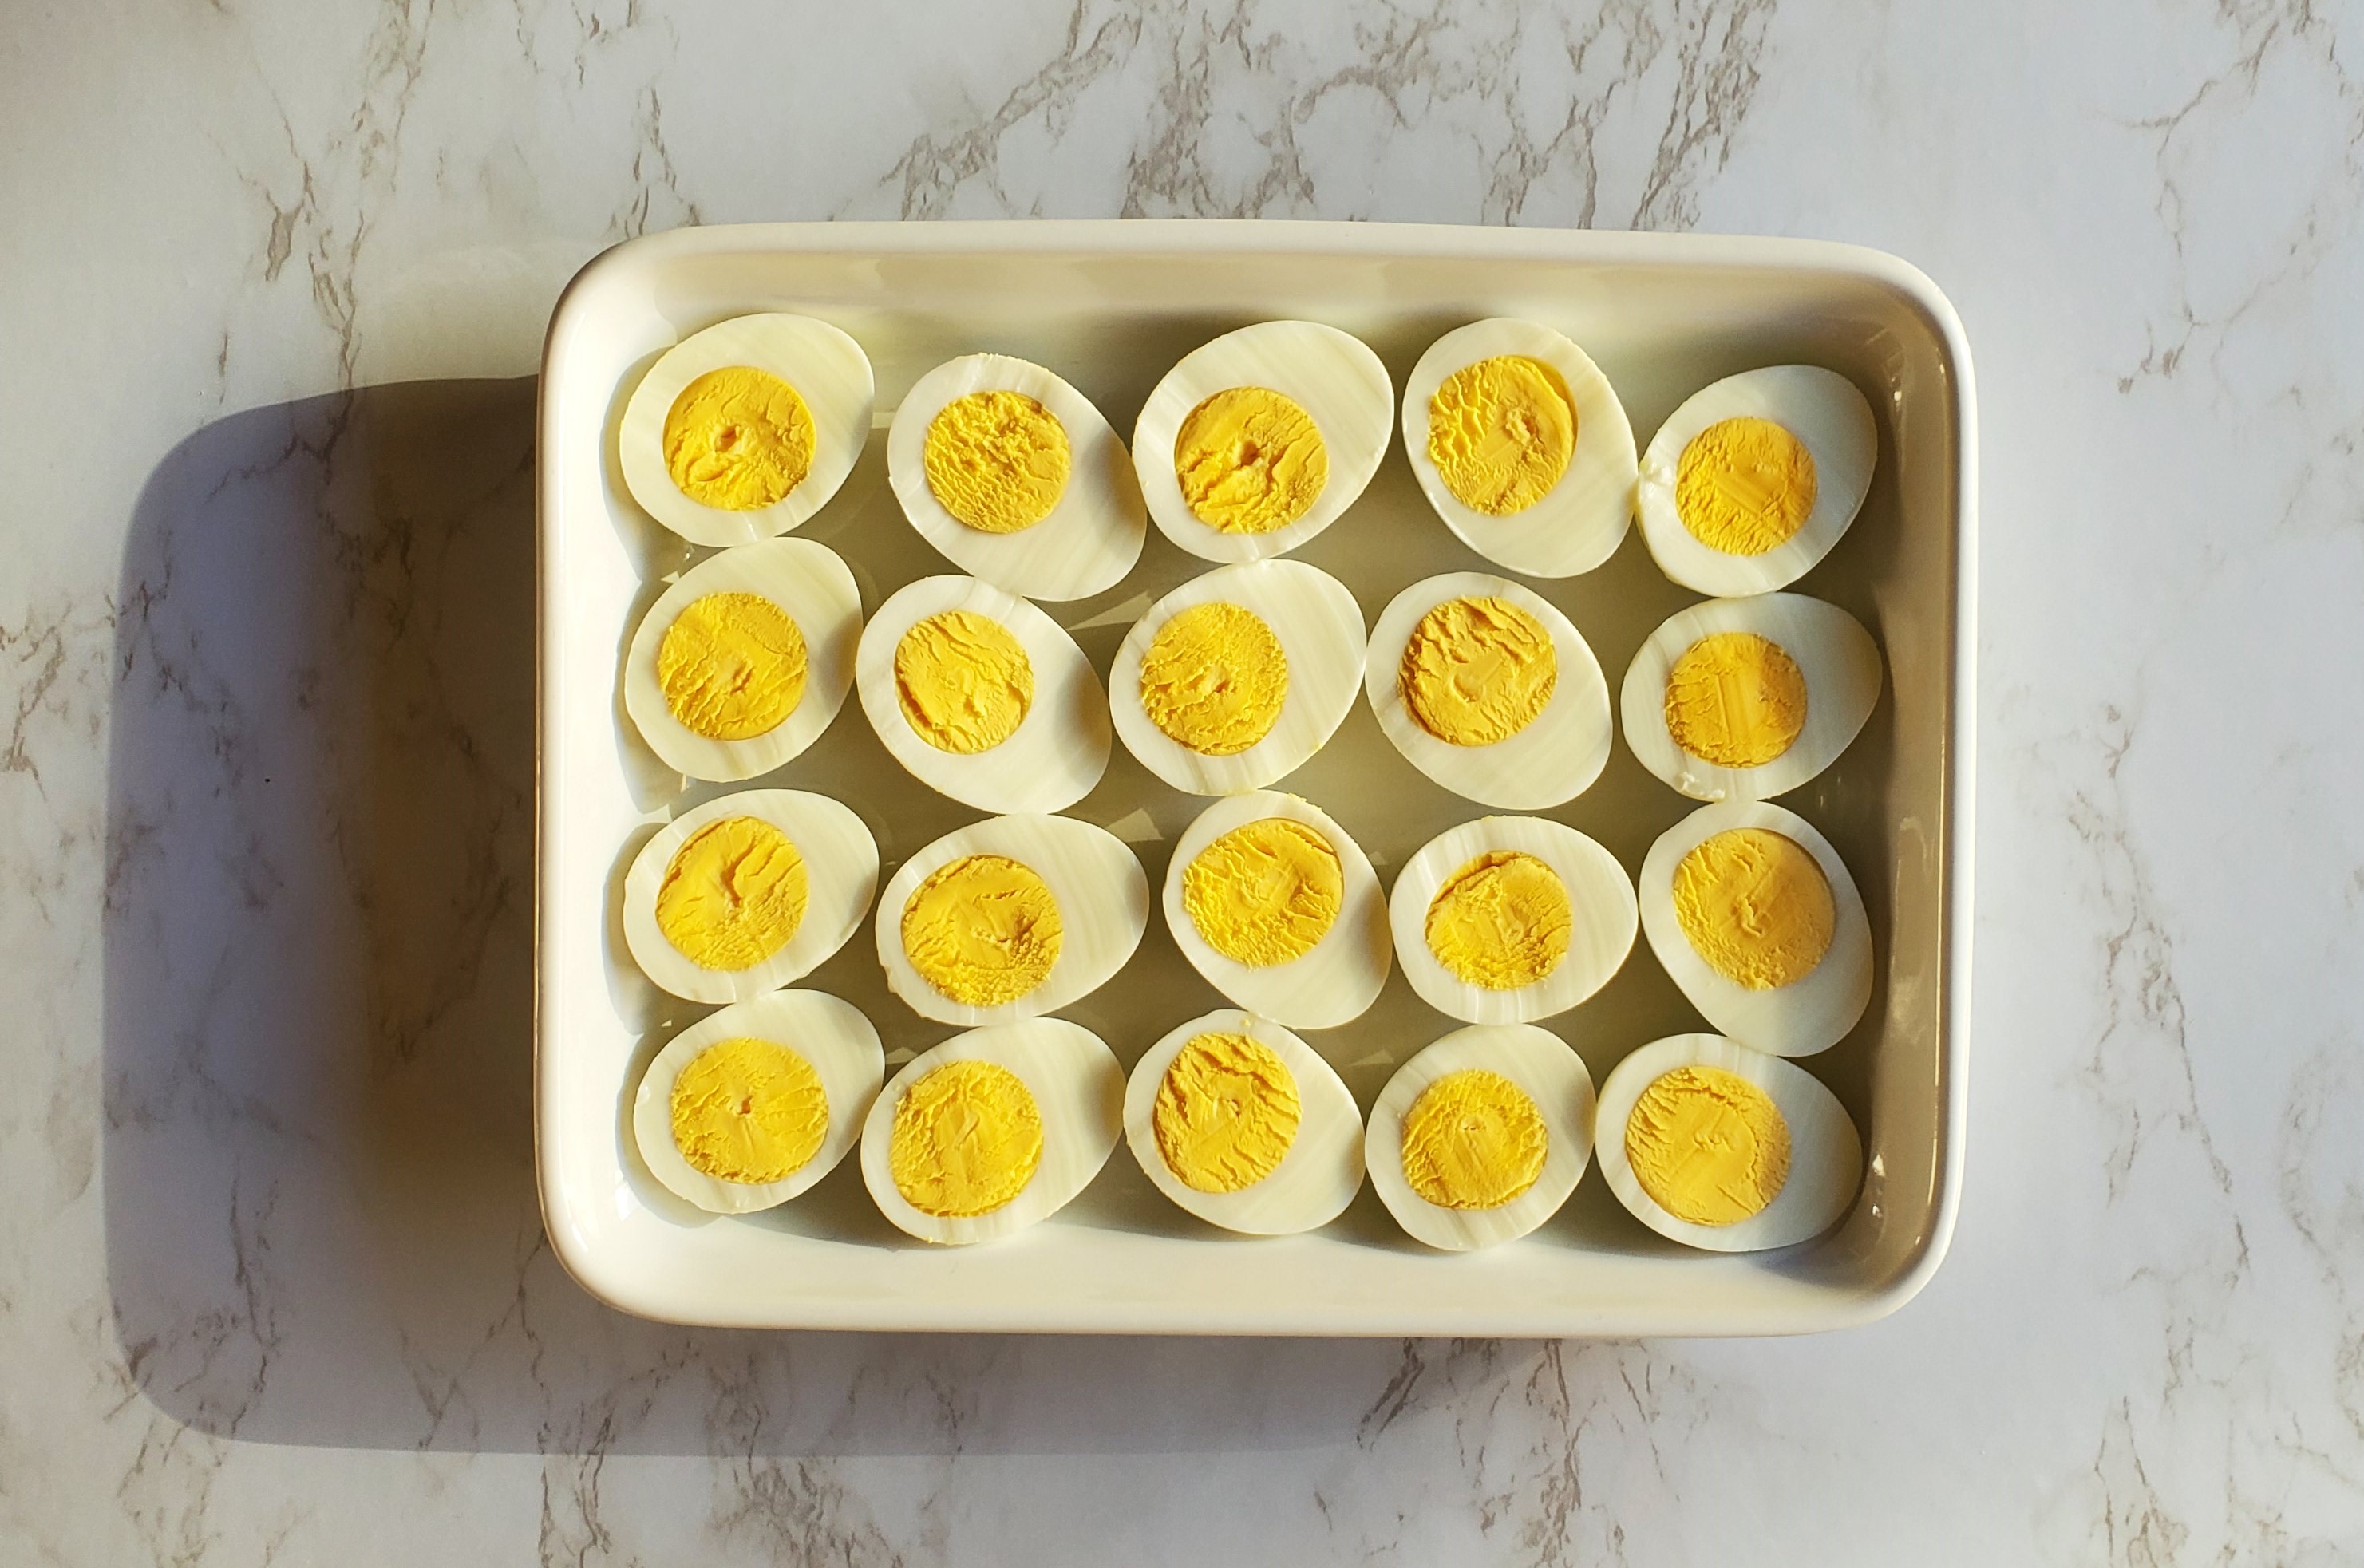 A white rectangular ceramic platter on a marble counter top filled with halved hard boiled eggs.